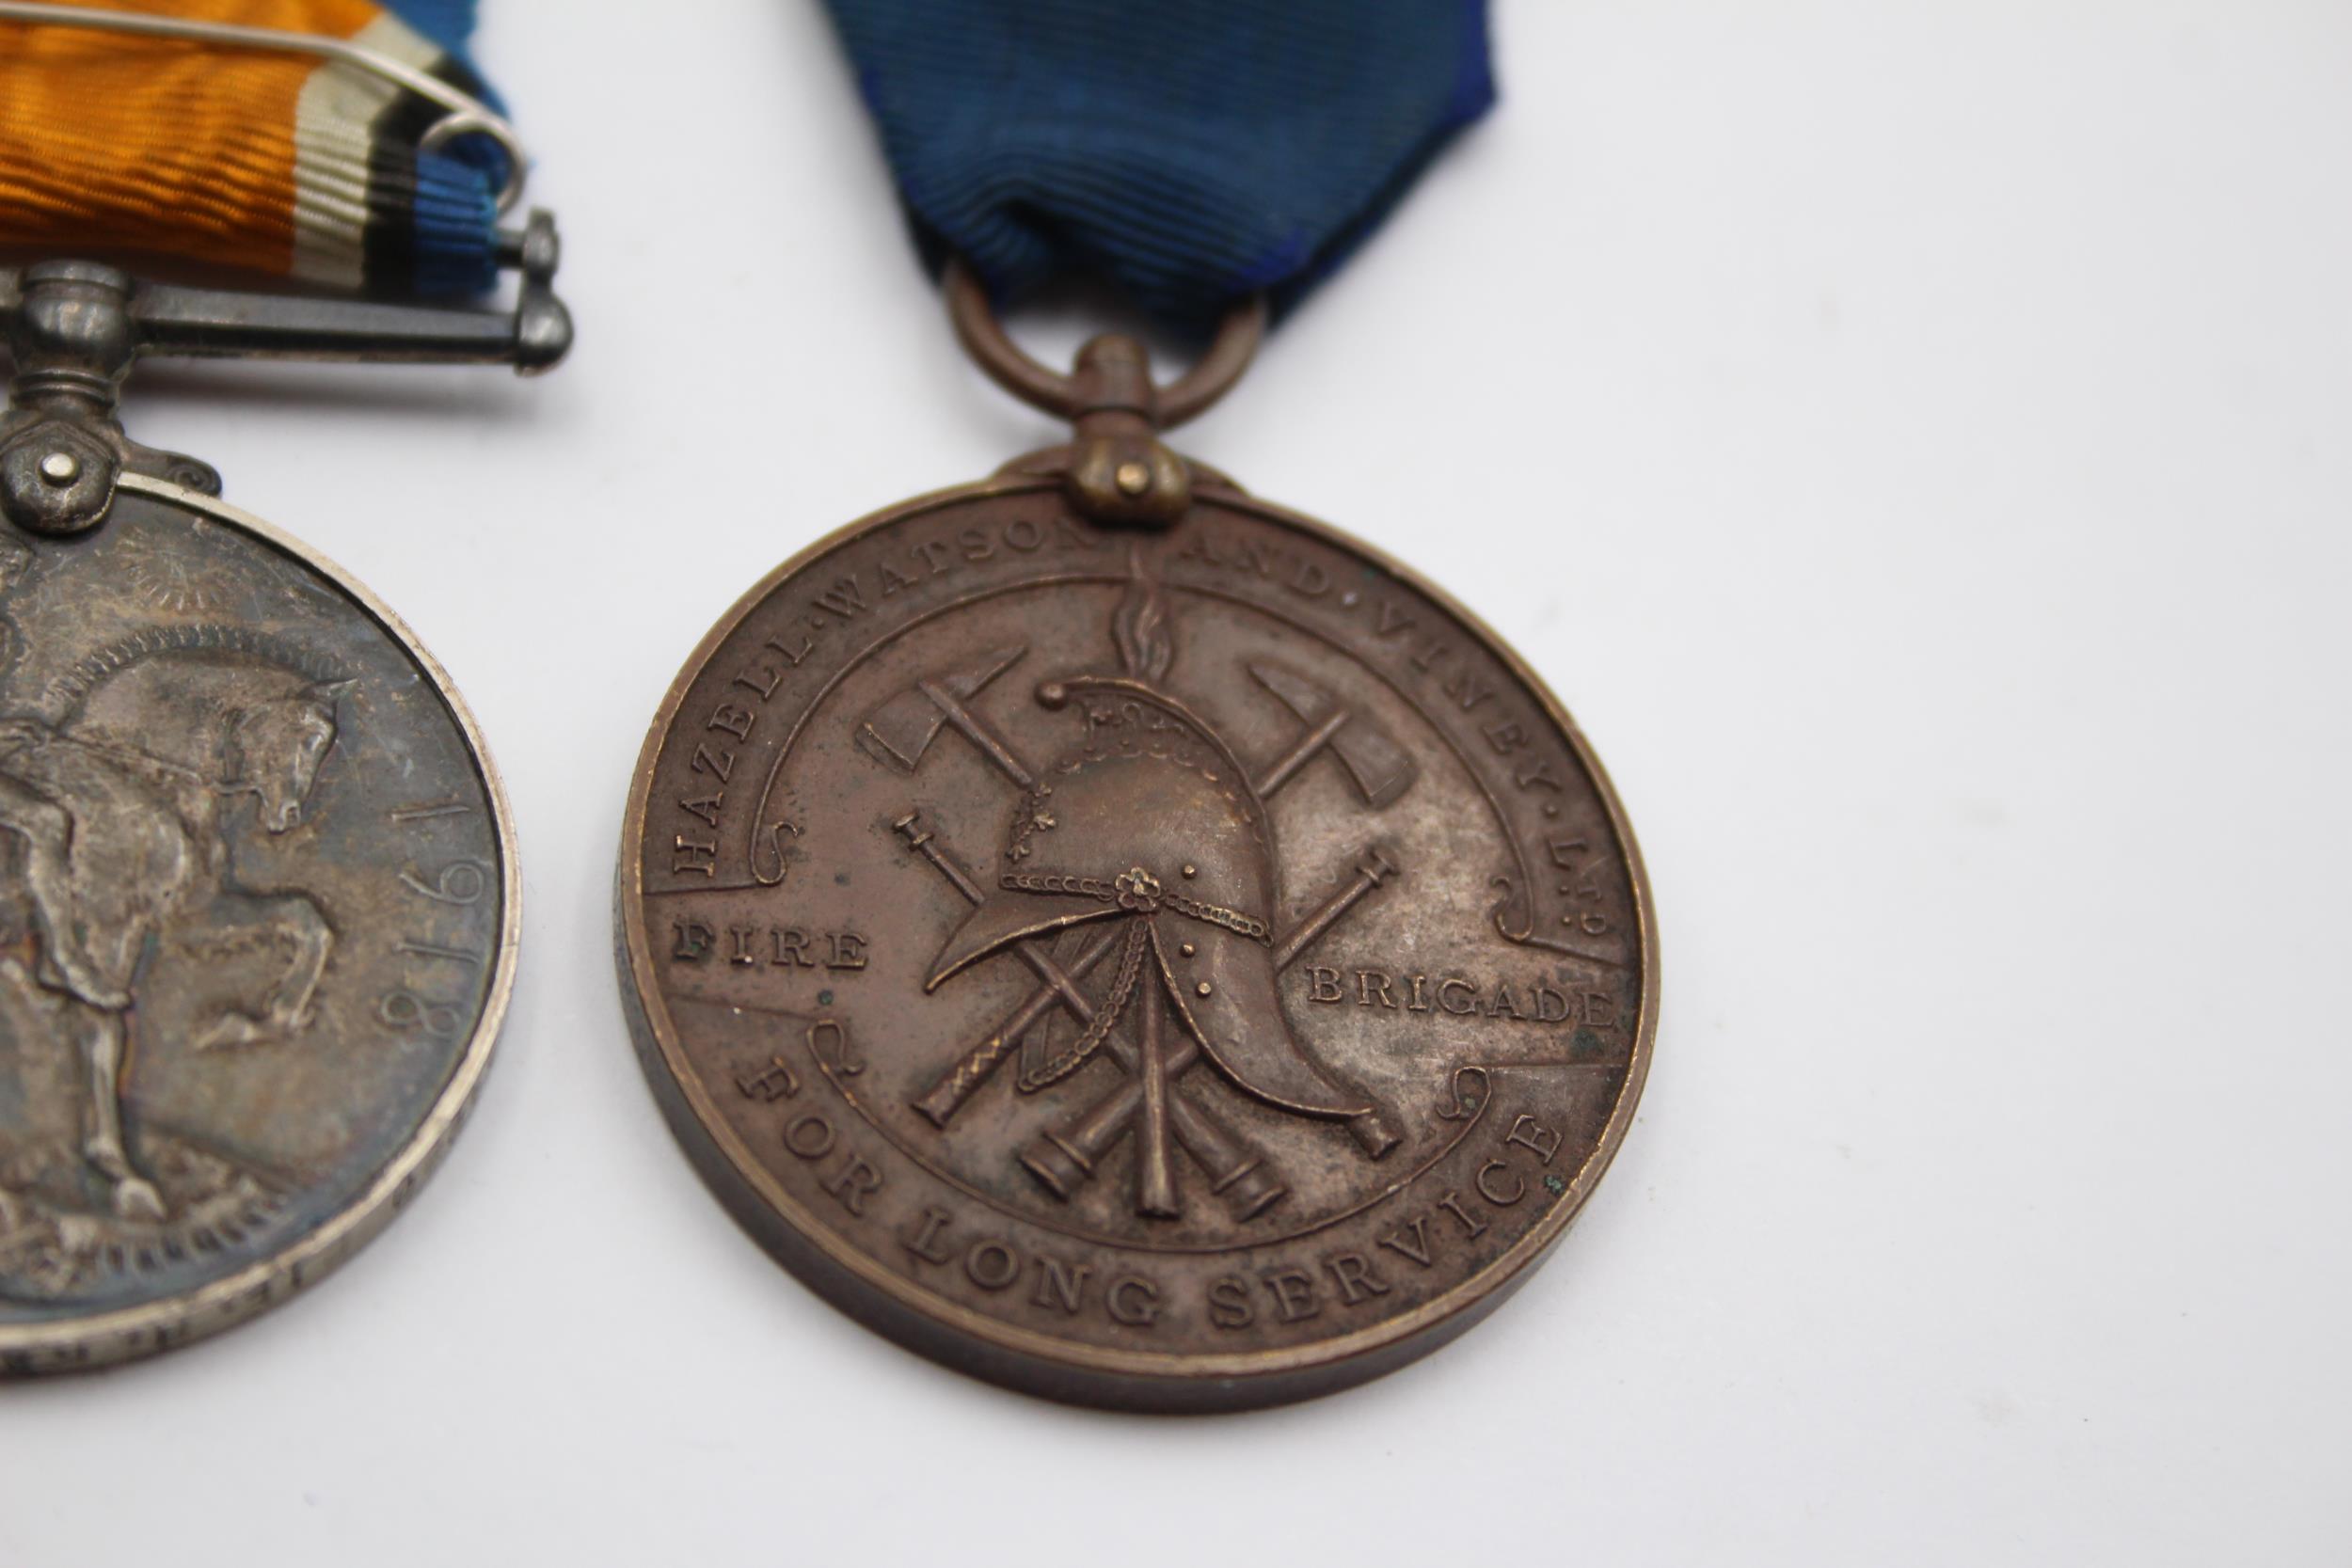 WW1 Firebrigade Medal Group Pair 34290 Pte Ratcliffe Gloster R, Fire 10yr // In antique condition - Image 4 of 5